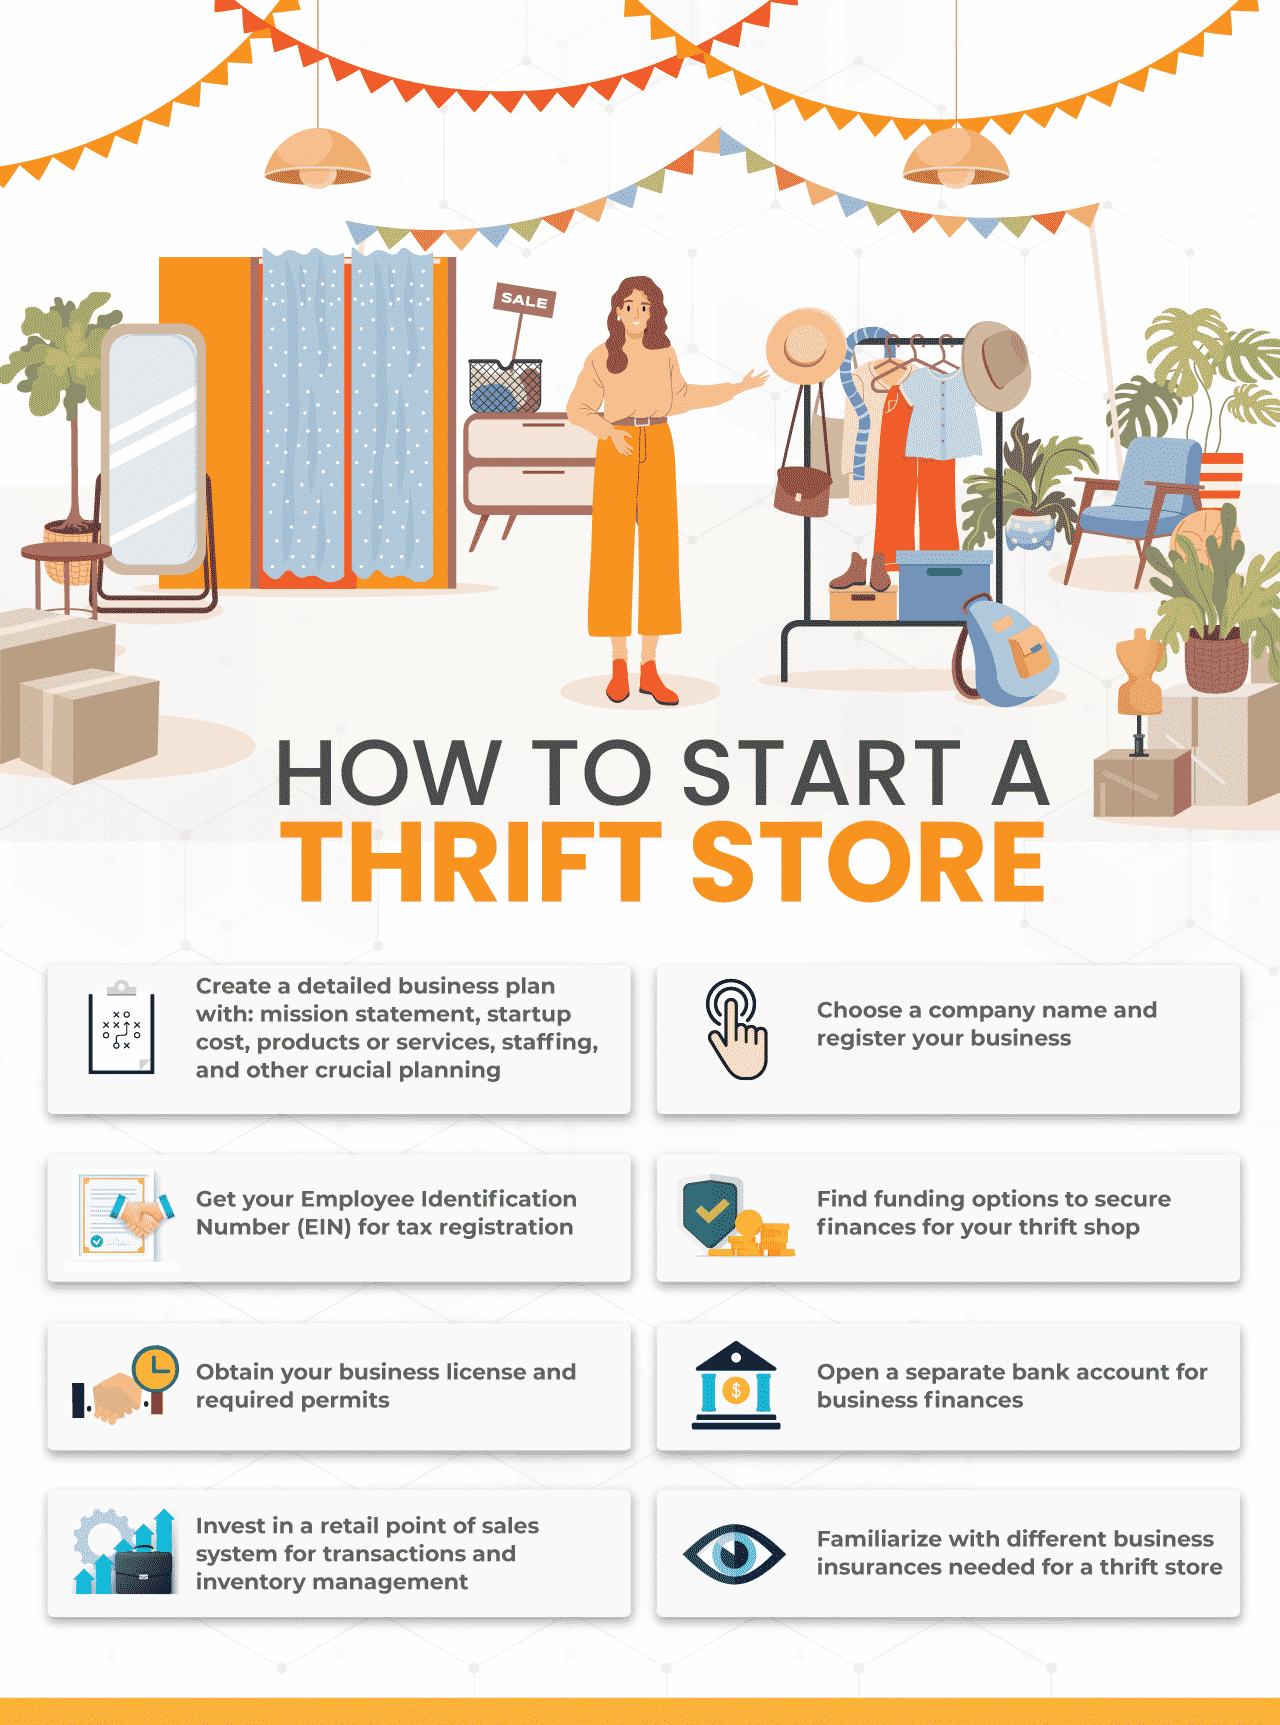 How To Start a Thrift Store Business in 2022 The Ultimate Guide